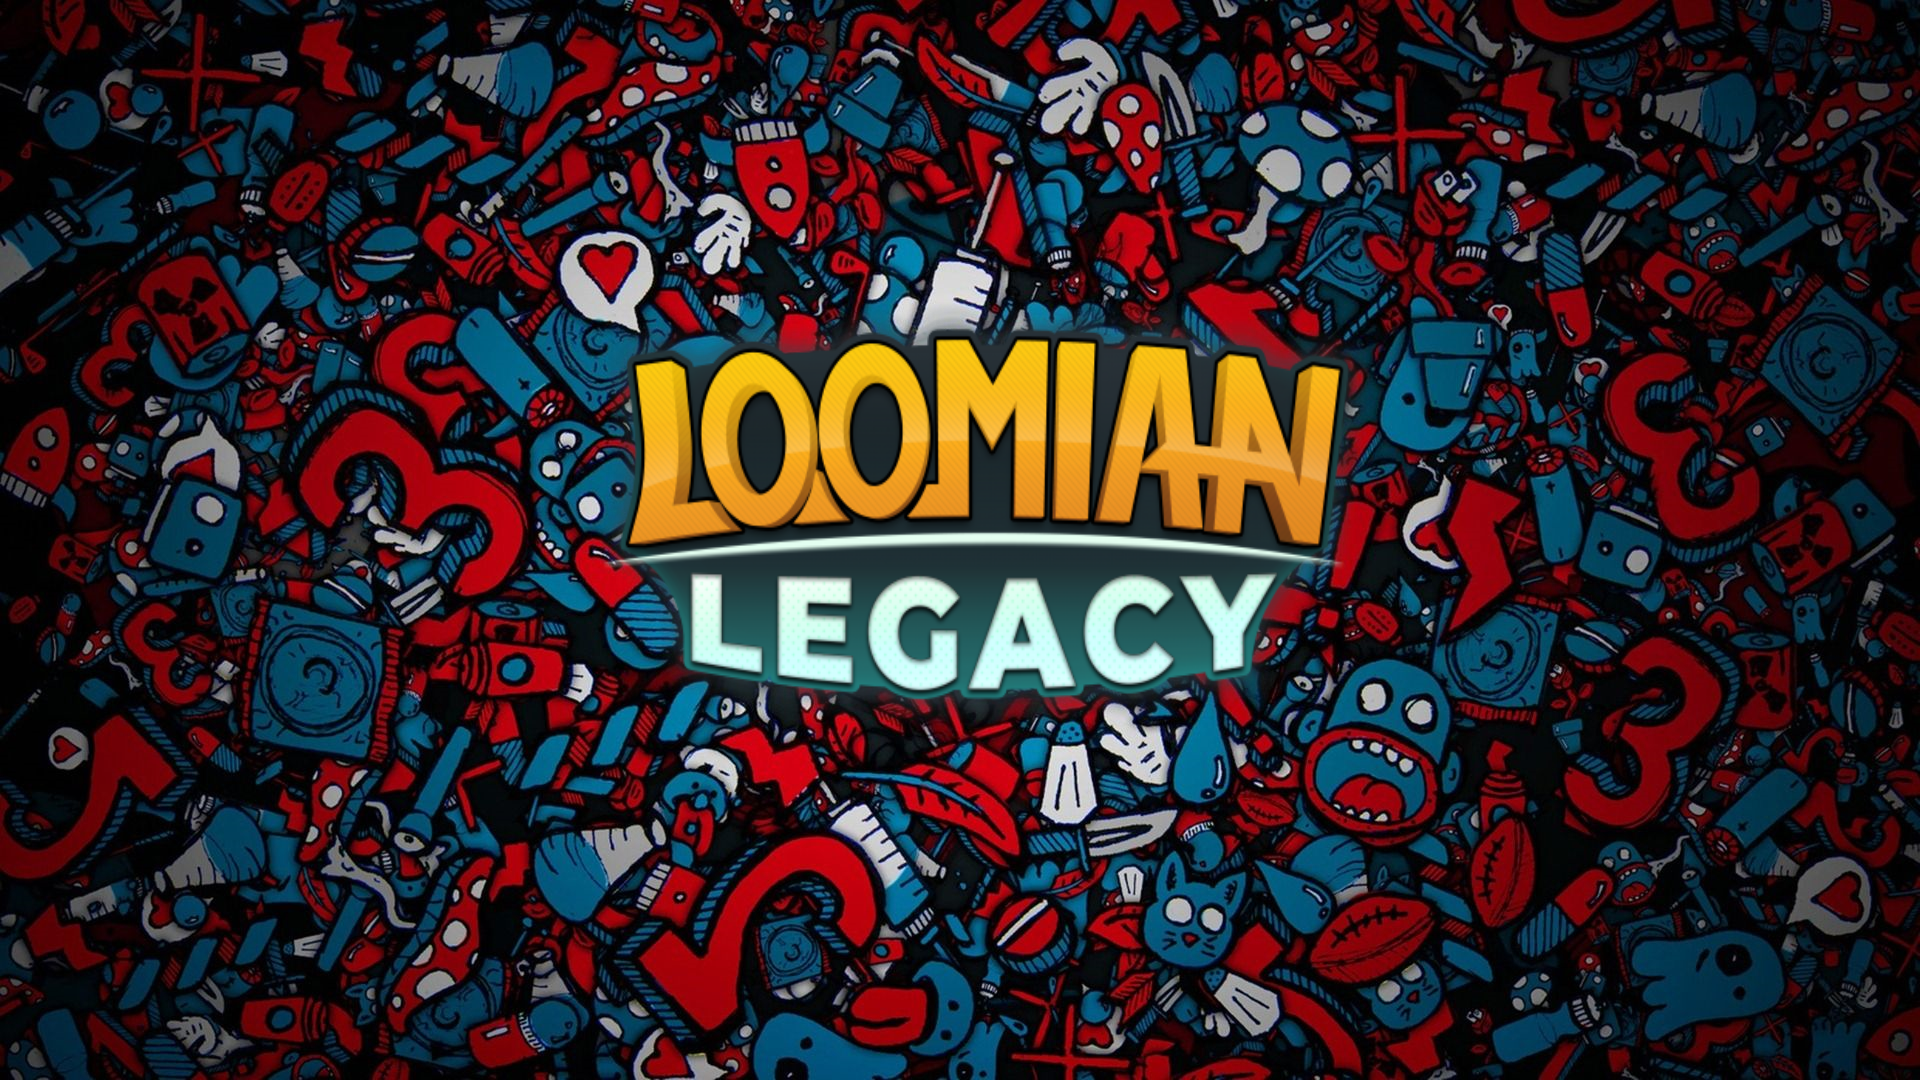 Loomian Legacy Starters Wallpapers